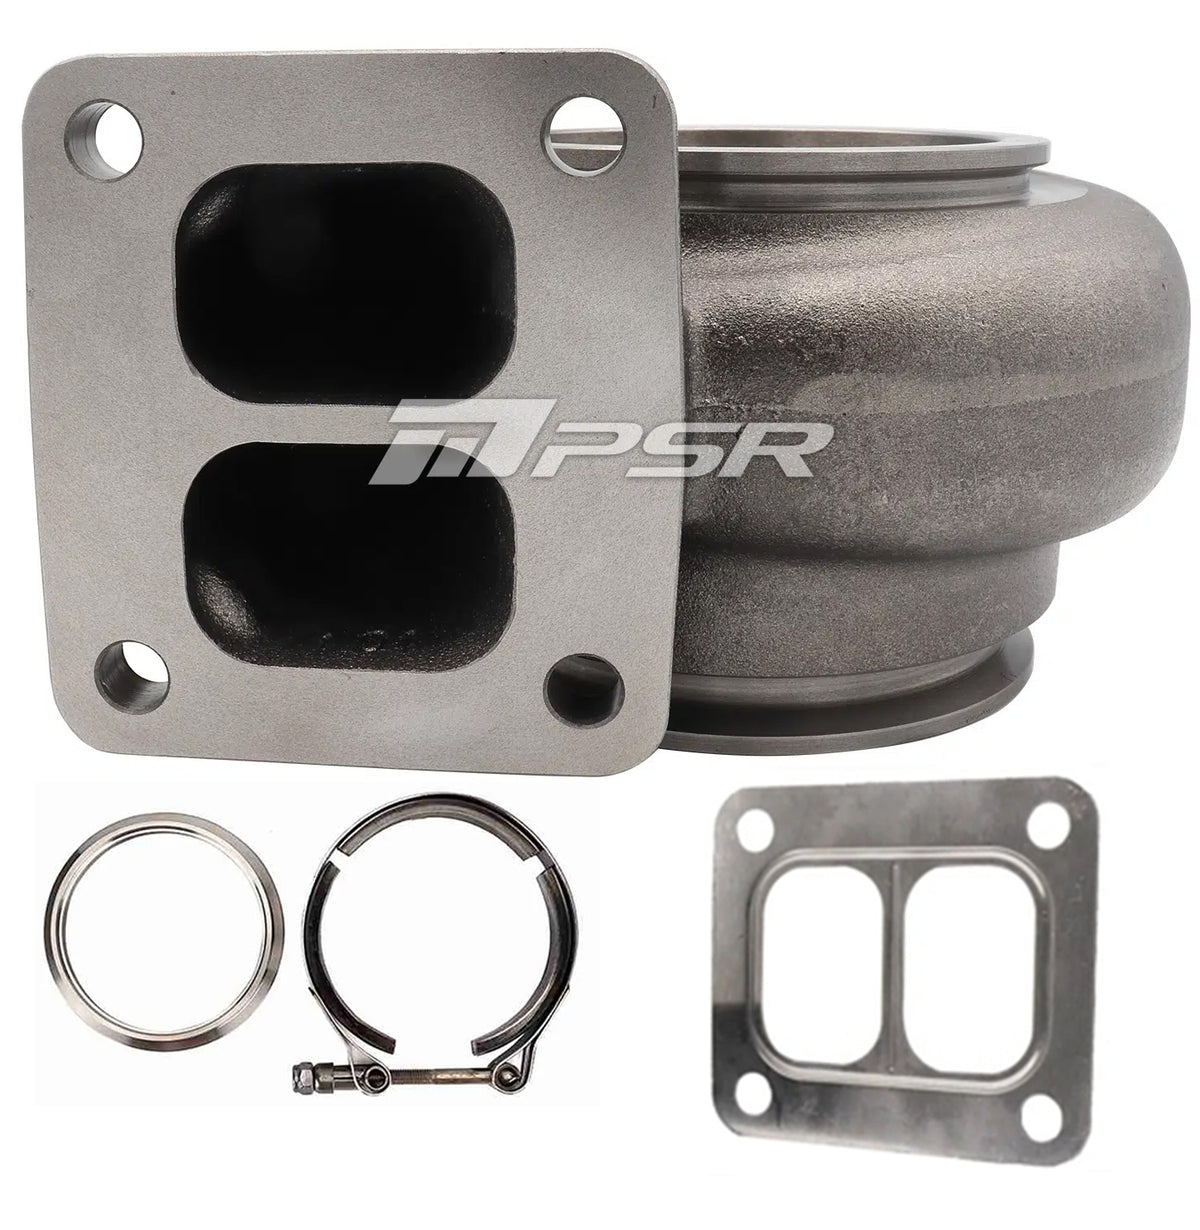 PSR Turbine Housing for 7782G, 8582G and 6782G Turbos